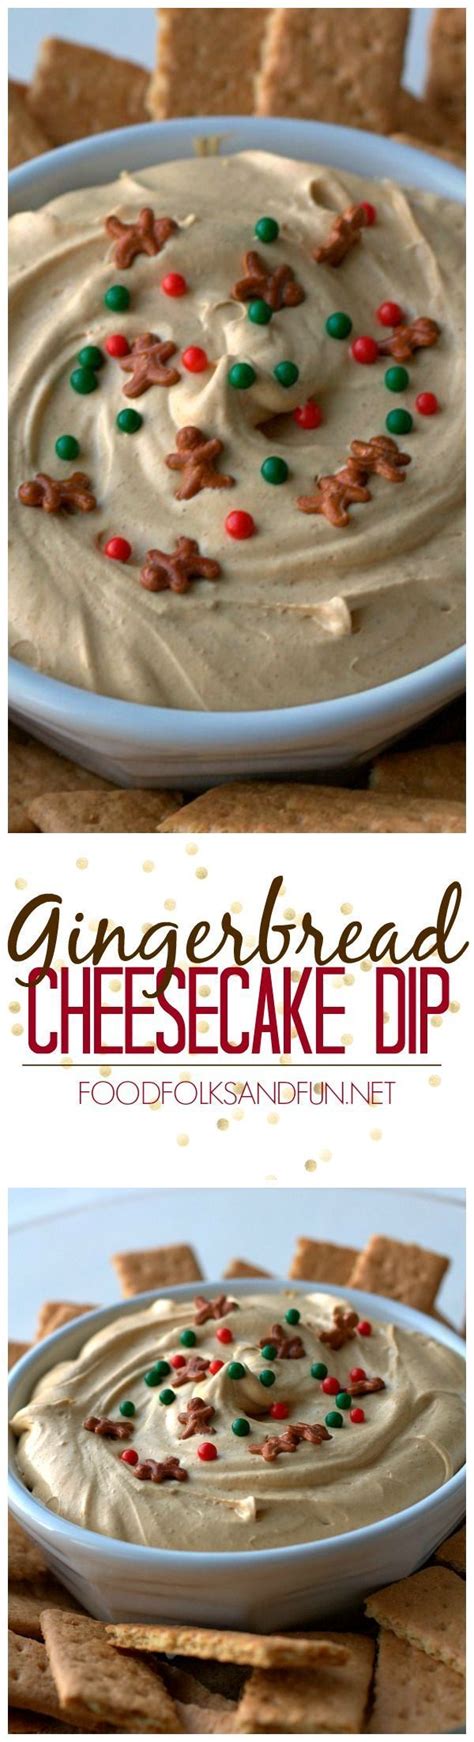 This sweet and salty santa crunch popcorn is delicious, easy to make and will be very popular with kids and adults at your holiday party. Make this Gingerbread Cheesecake Dip and you'll be the most popular person at the party! It take ...